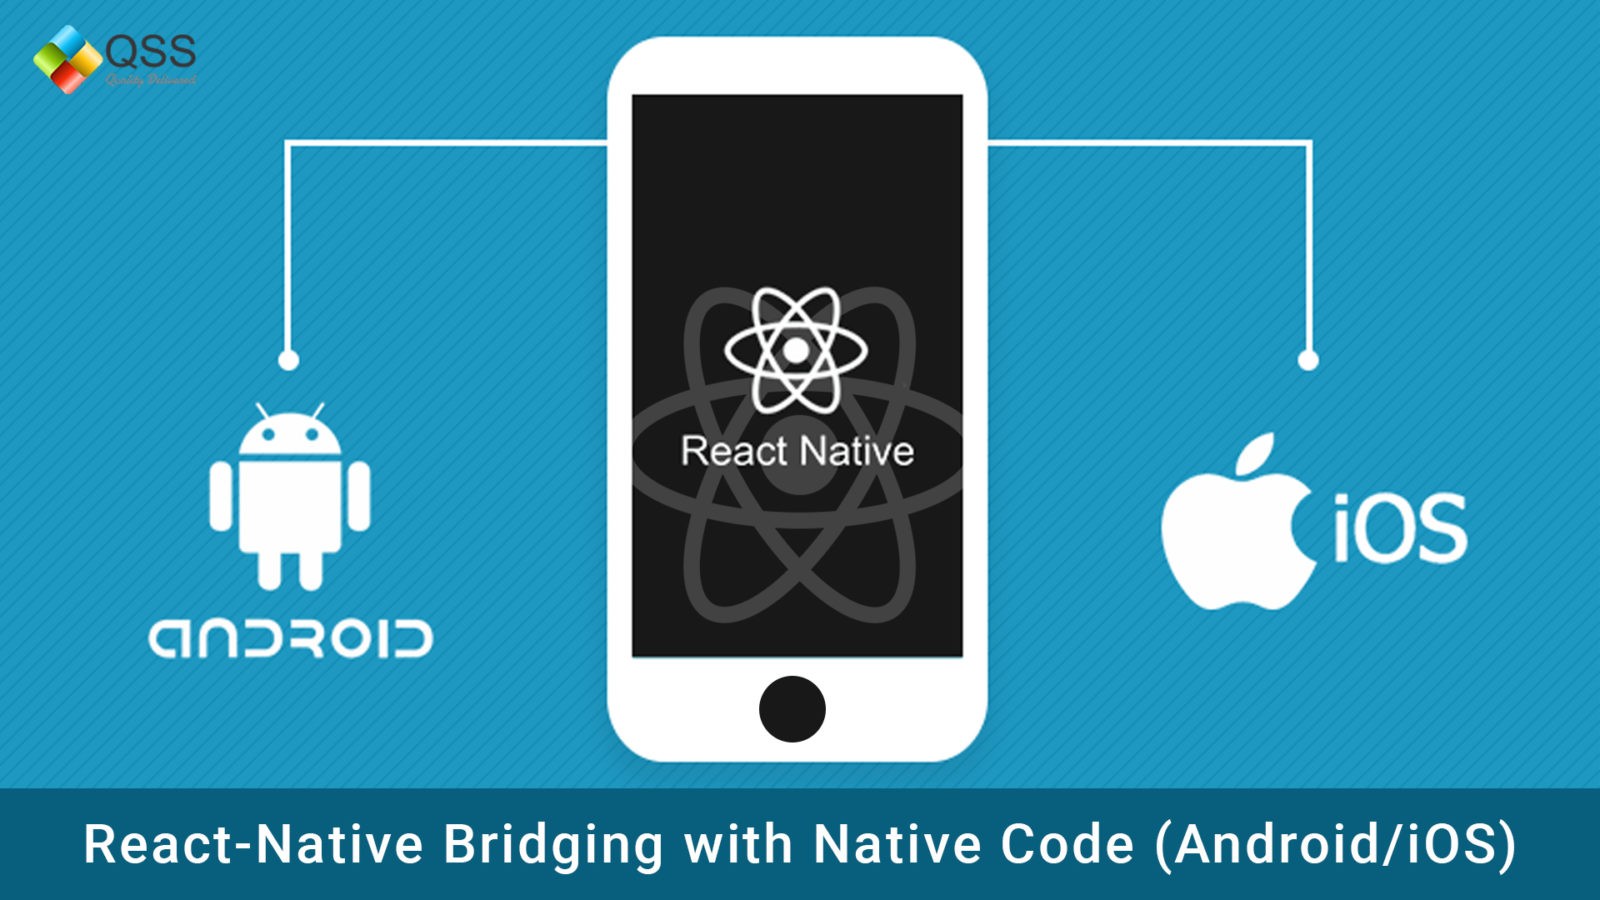 React-Native Bridging with Native Code (Android/iOS)